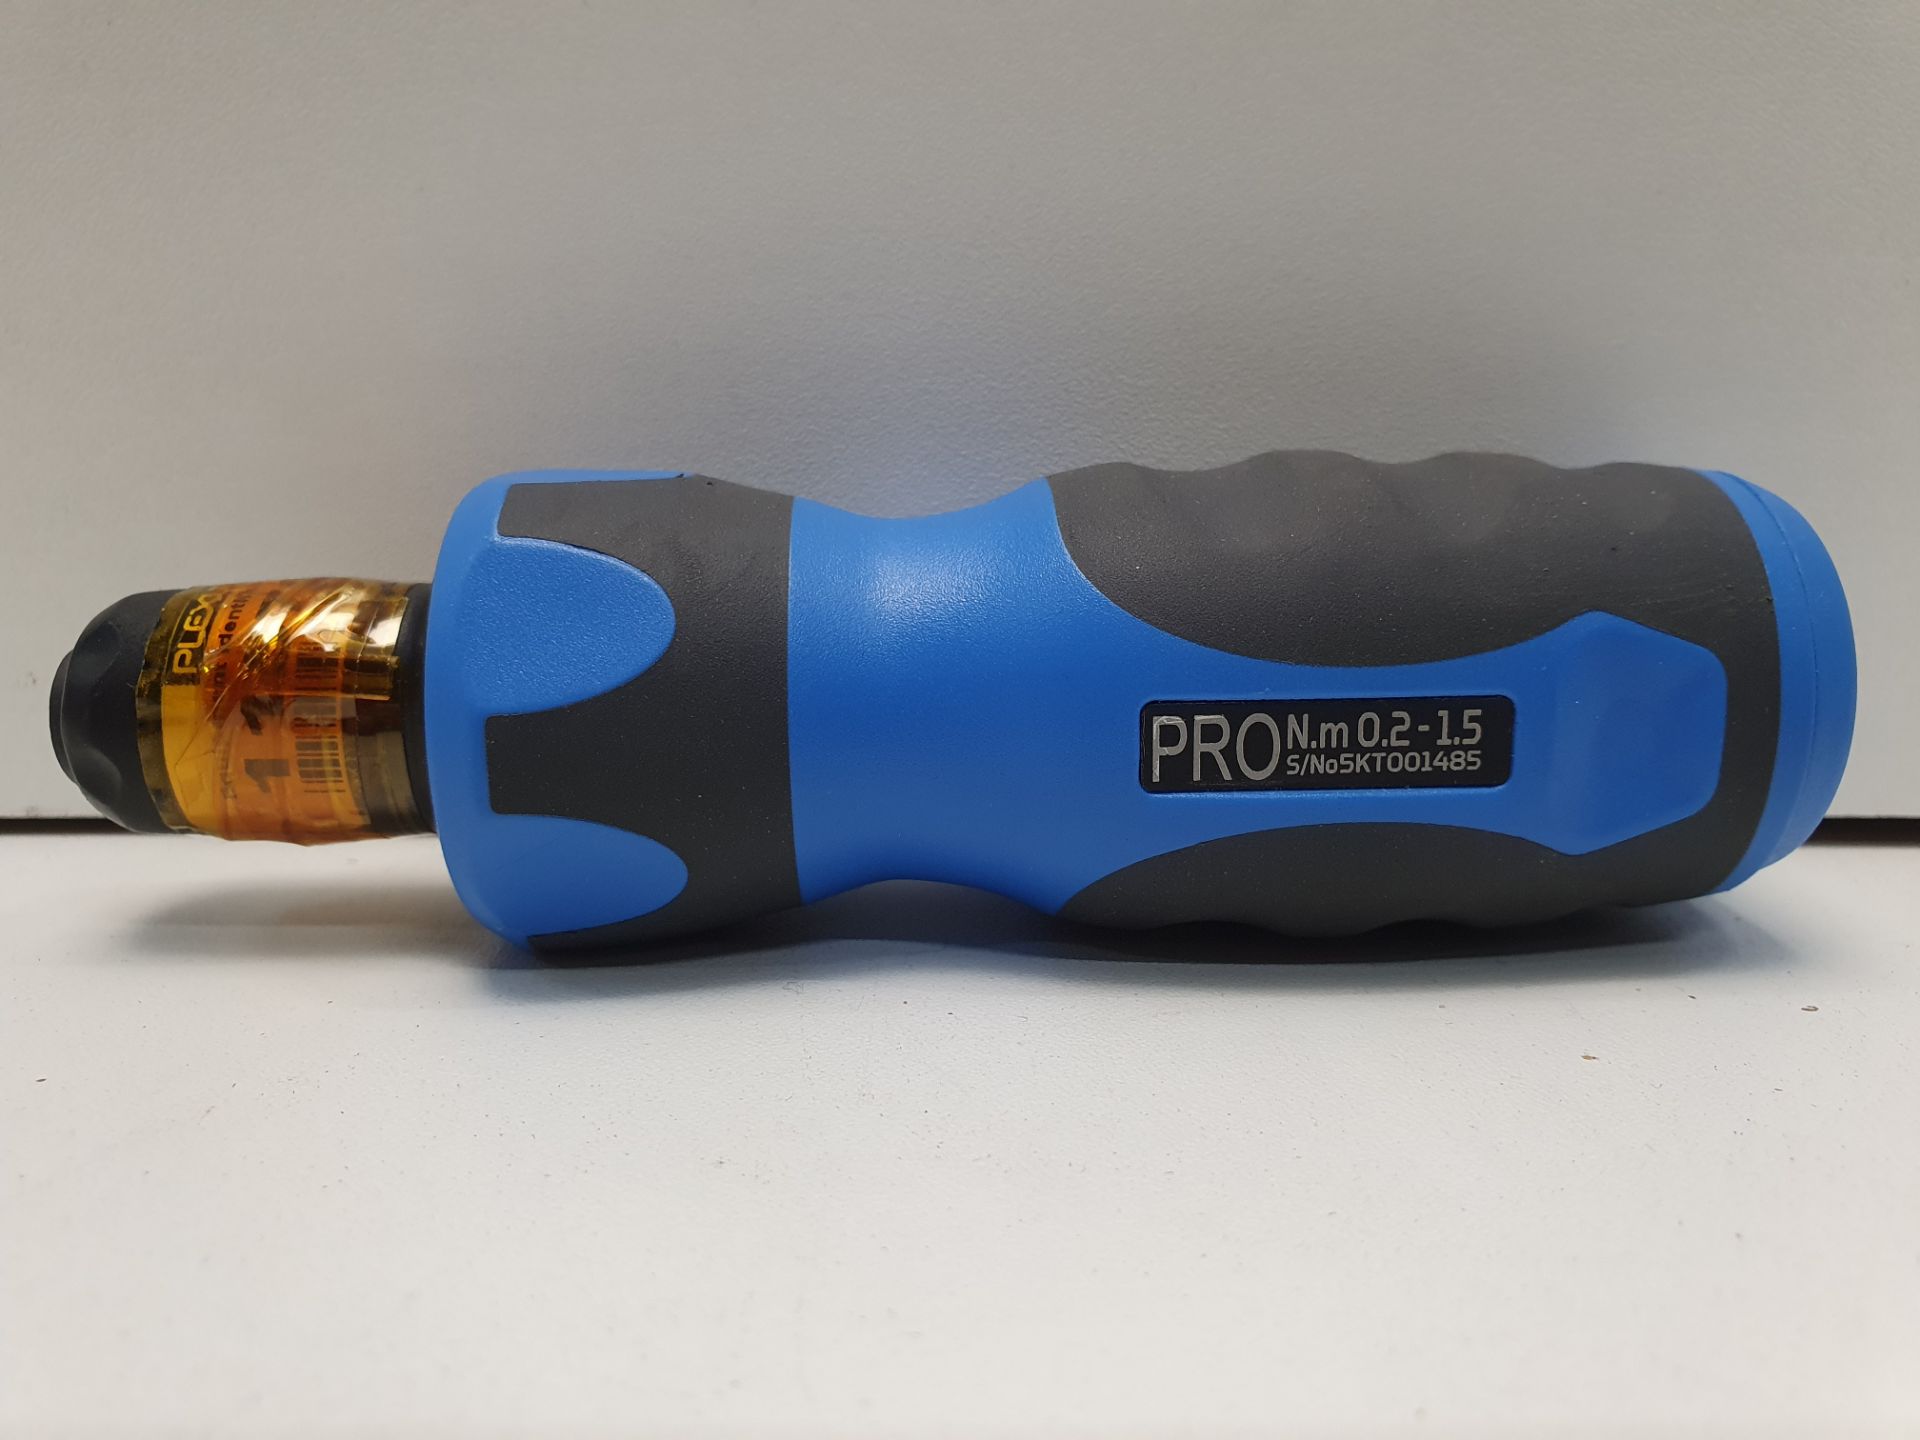 Gedore 1/4 in Hex Pre-Settable Torque Screwdriver, 2.5 ? 13.5Nm without Bar - Image 2 of 4